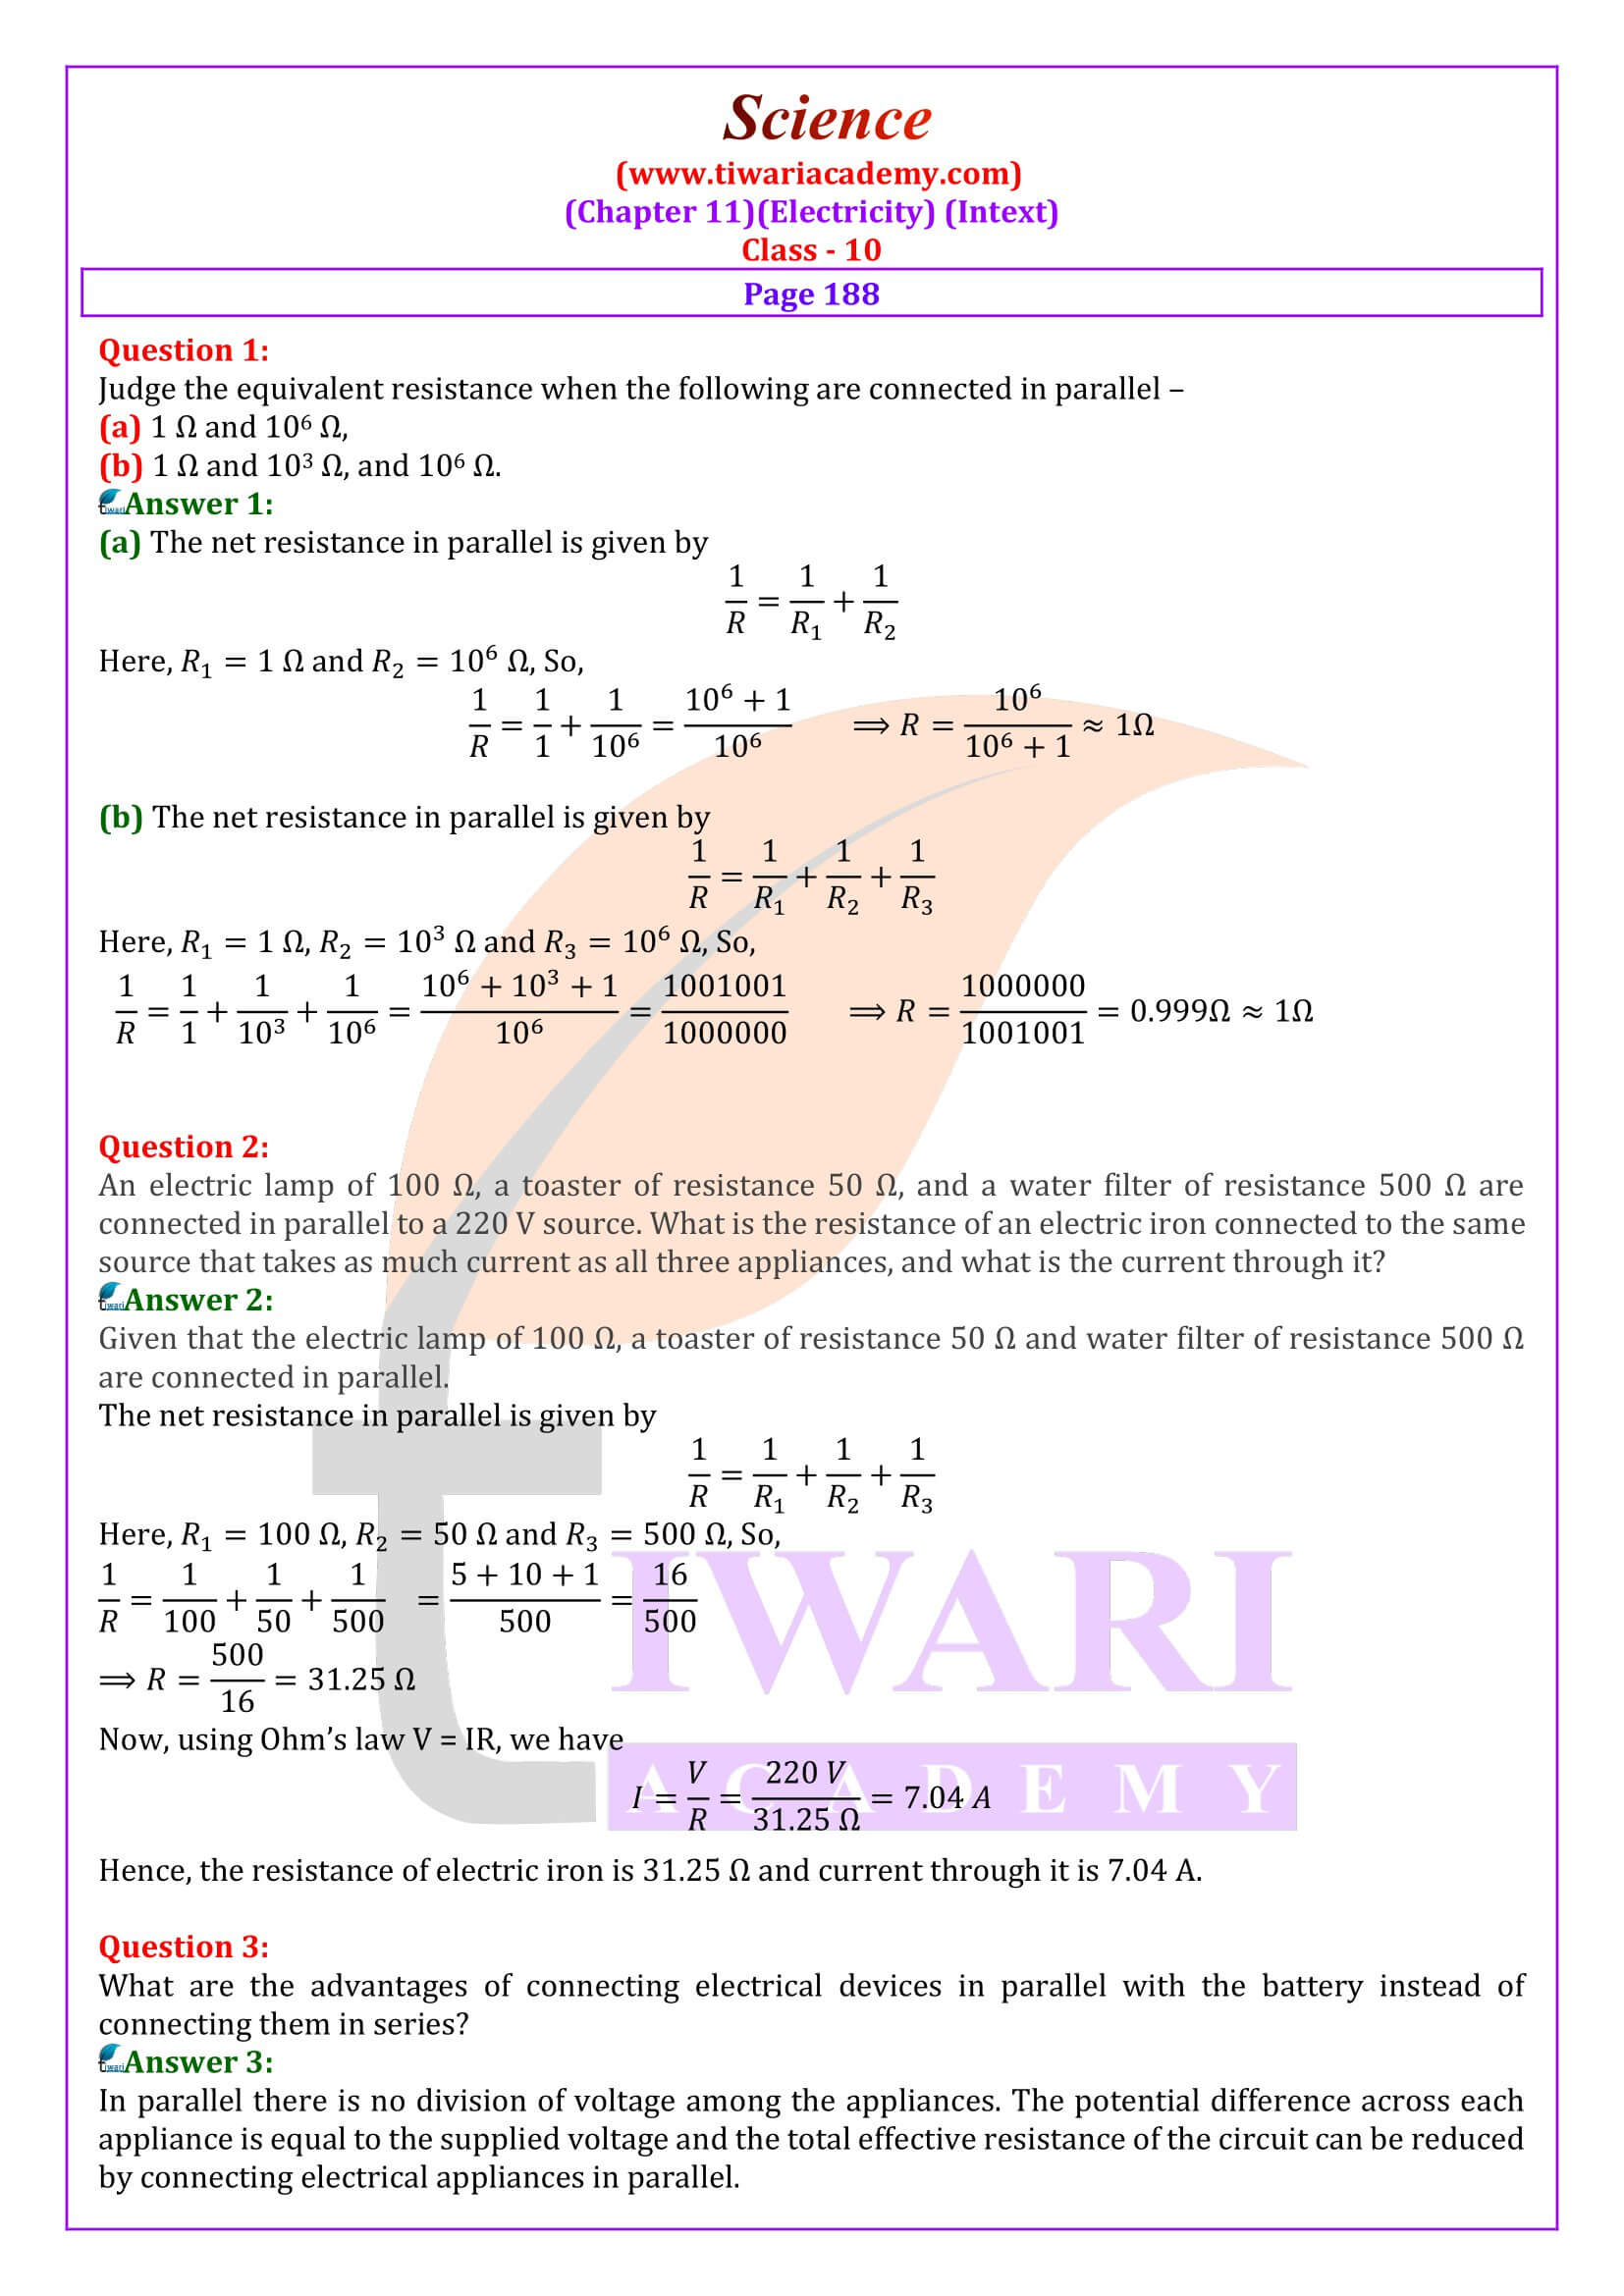 NCERT Solutions for Class 10 Science Chapter 11 guide in English